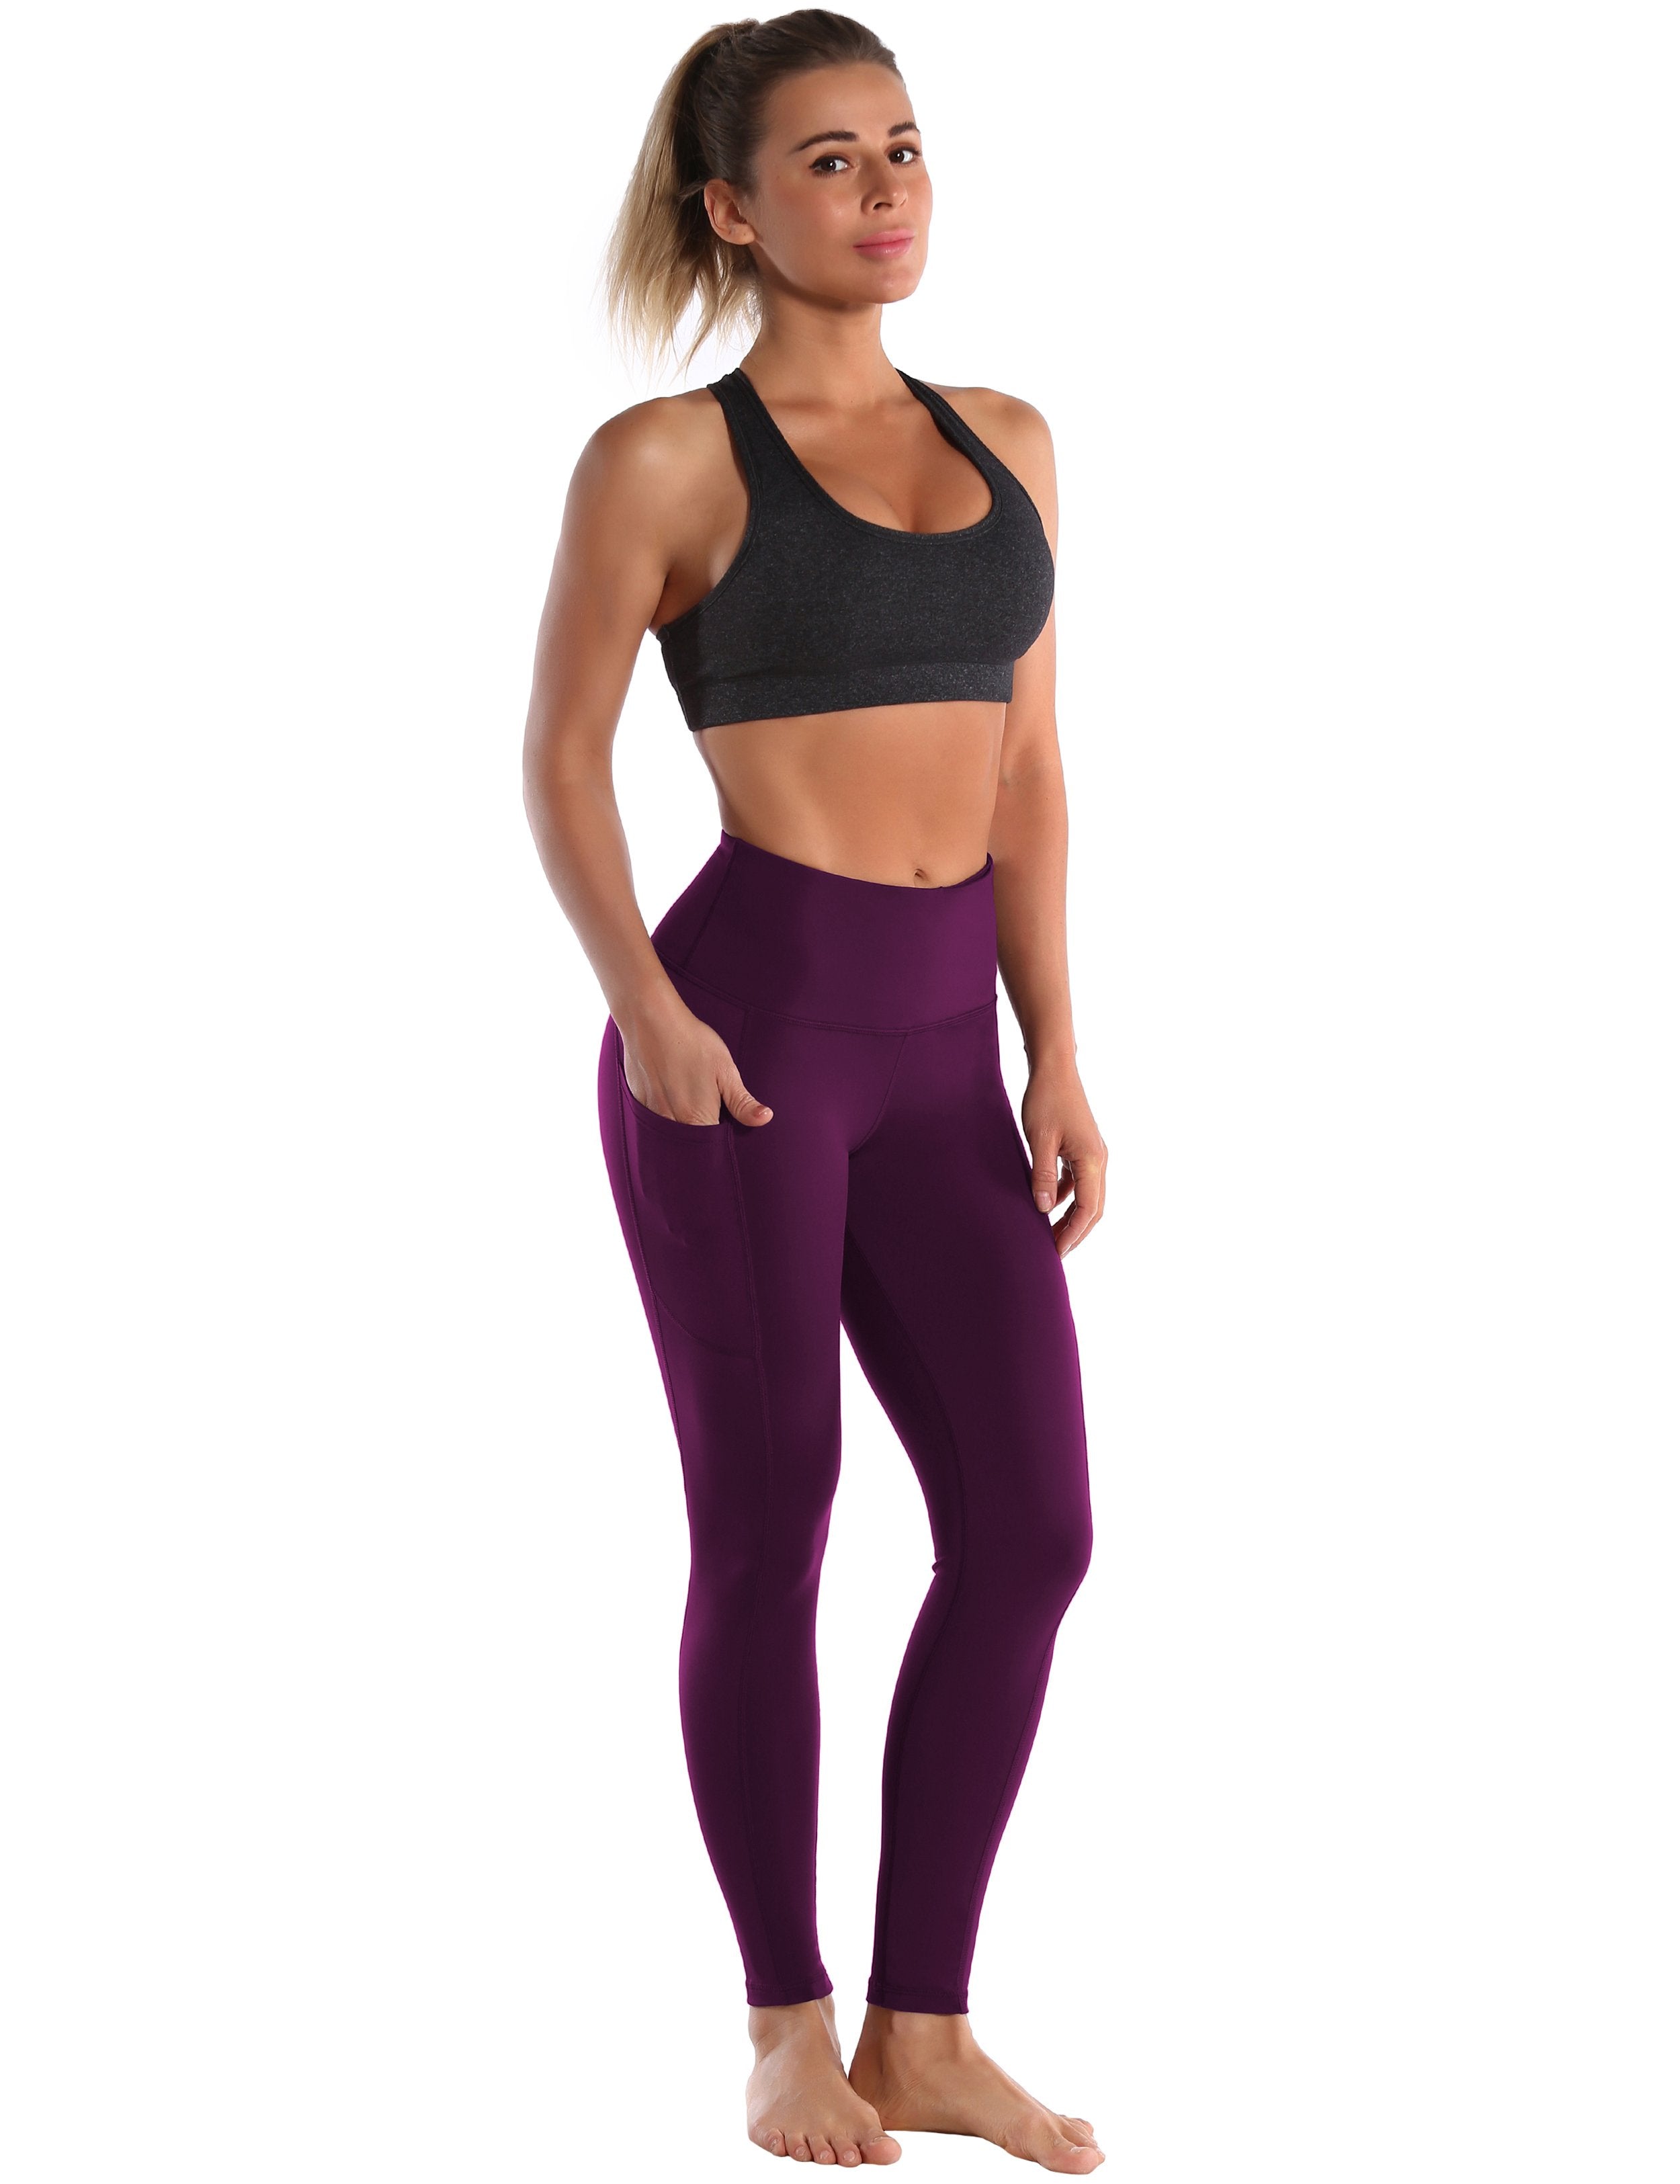 Hip Line Side Pockets Yoga Pants grapevine Sexy Hip Line Side Pockets 75%Nylon/25%Spandex Fabric doesn't attract lint easily 4-way stretch No see-through Moisture-wicking Tummy control Inner pocket Two lengths